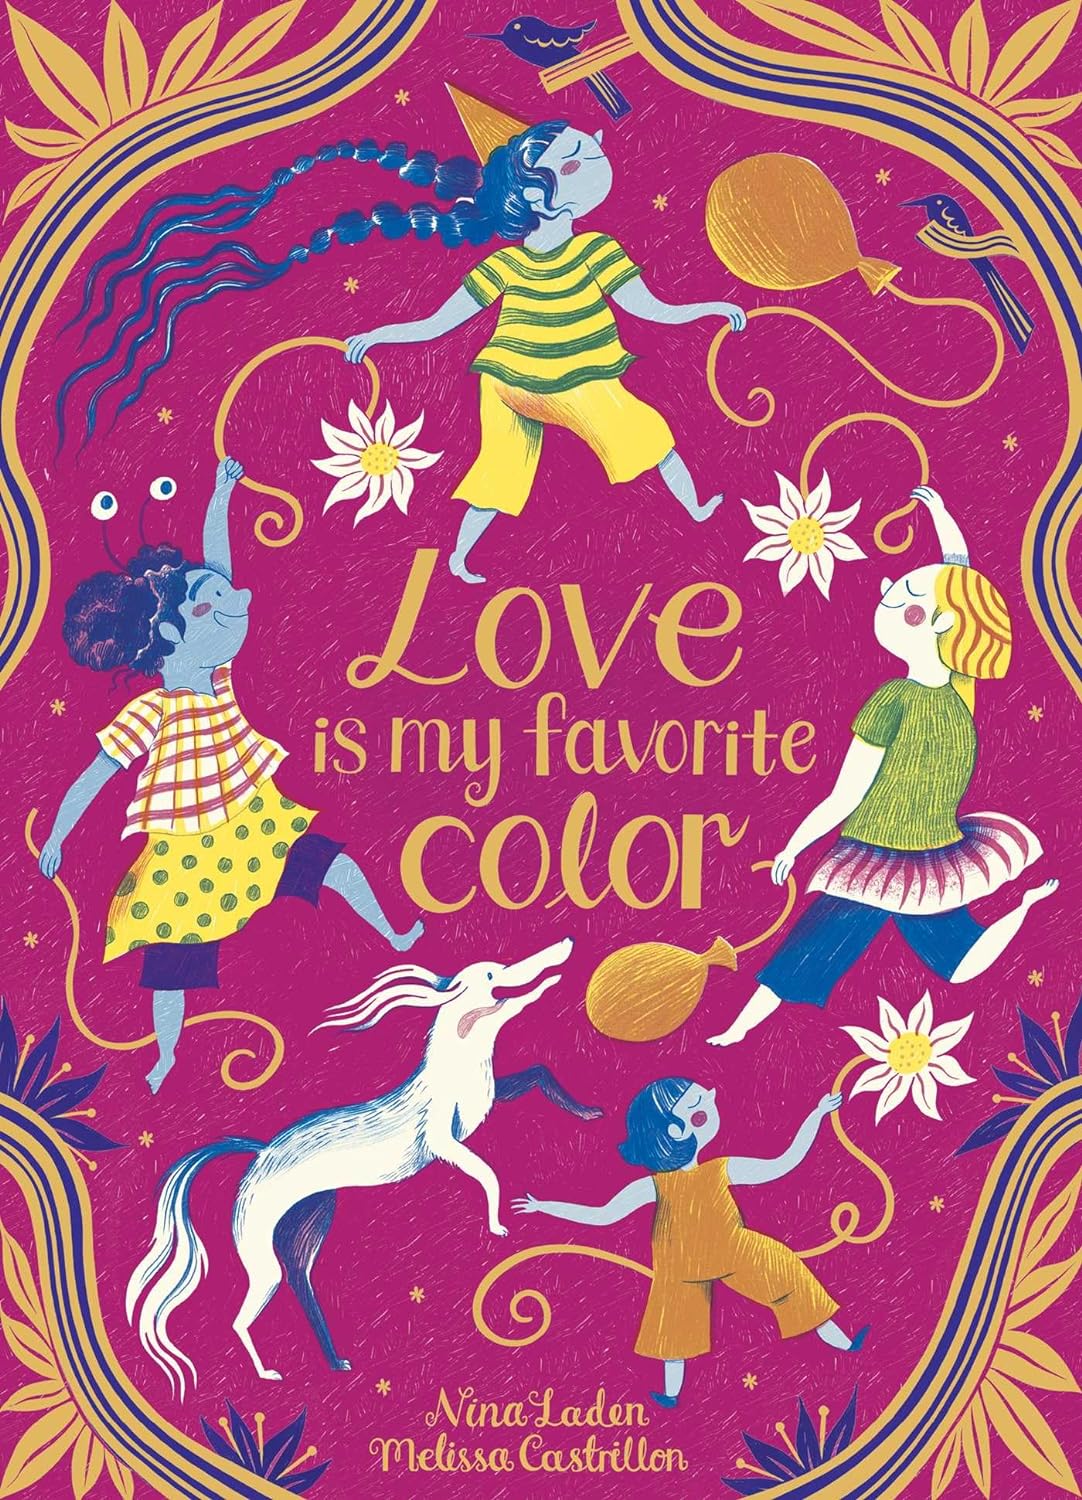 Love is My Favorite Color, by Nina Laden